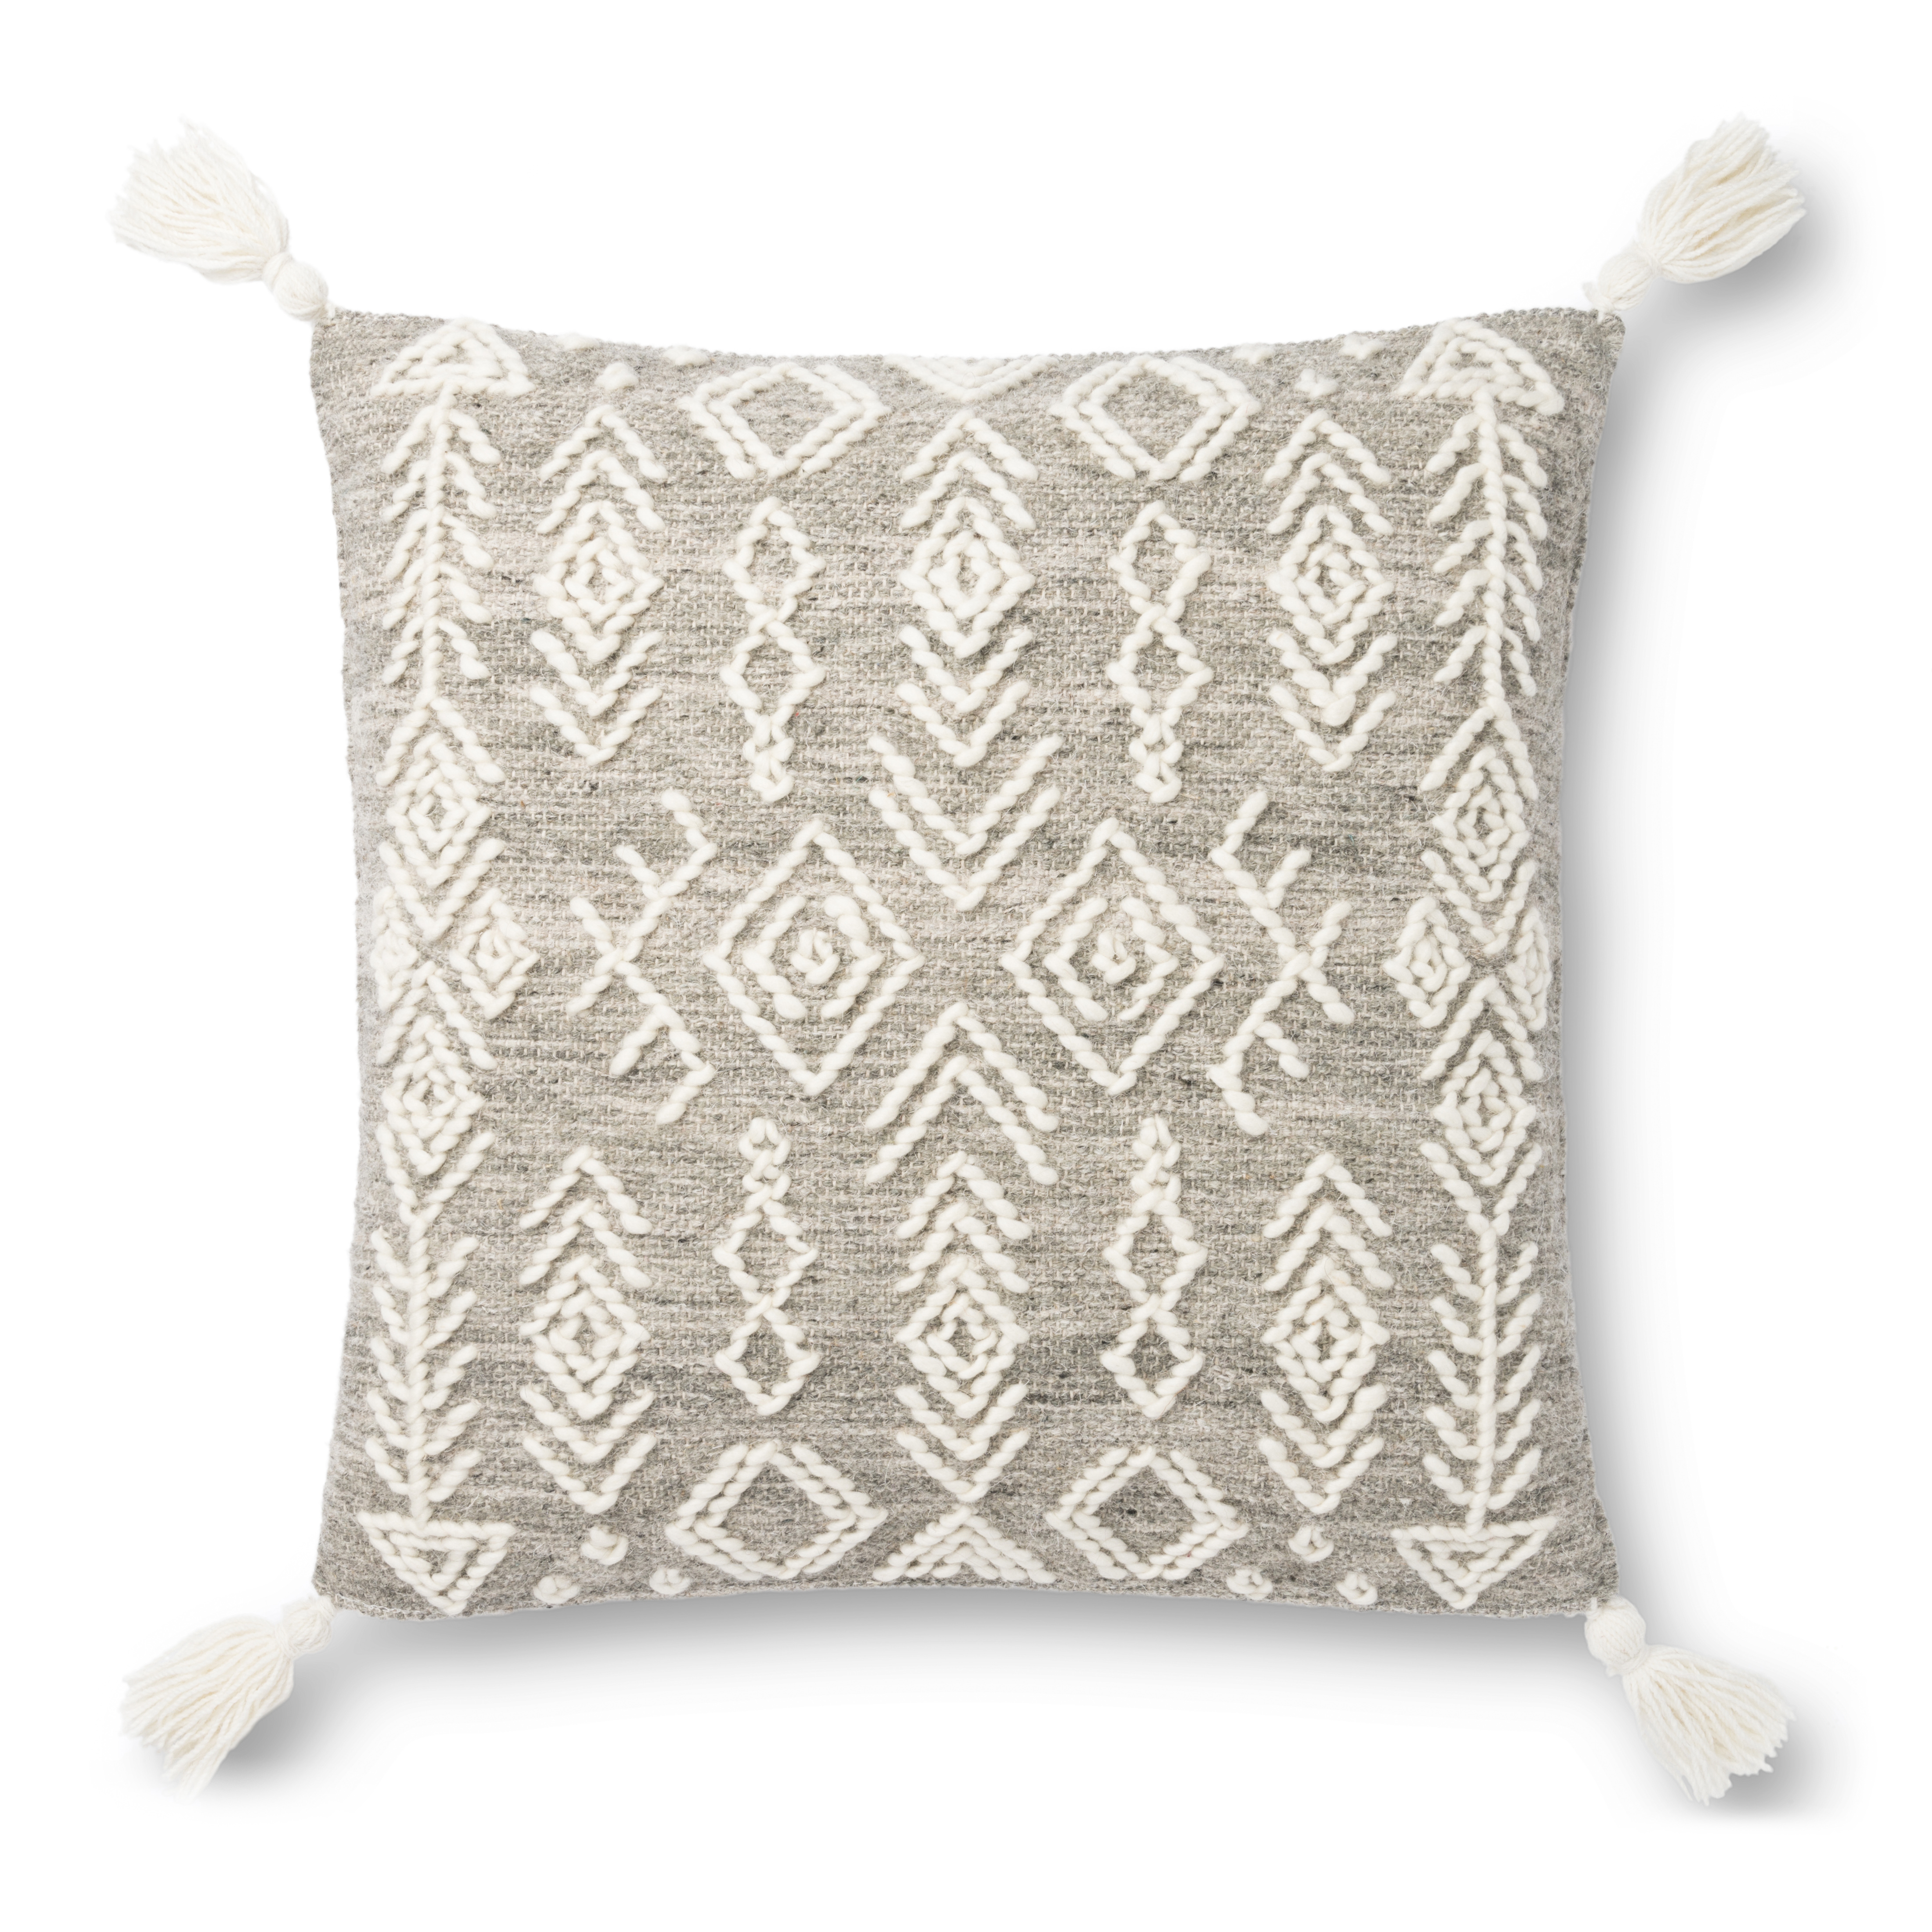 Justina Blakeney x Loloi PILLOWS P0840 Grey / Ivory 22" x 22" Cover Only - Loloi Rugs